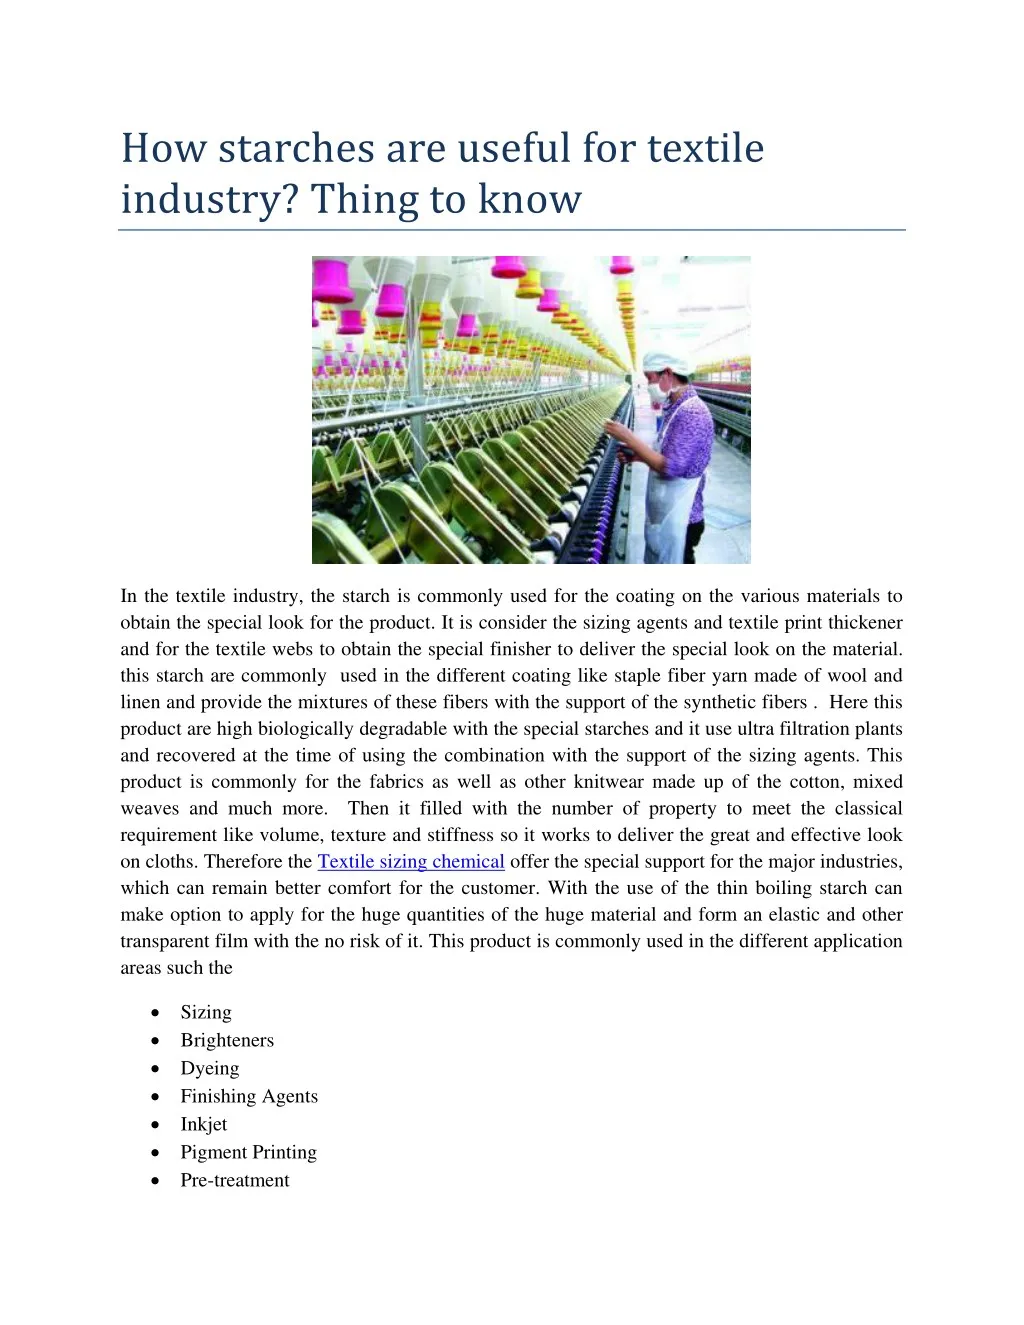 how starches are useful for textile industry